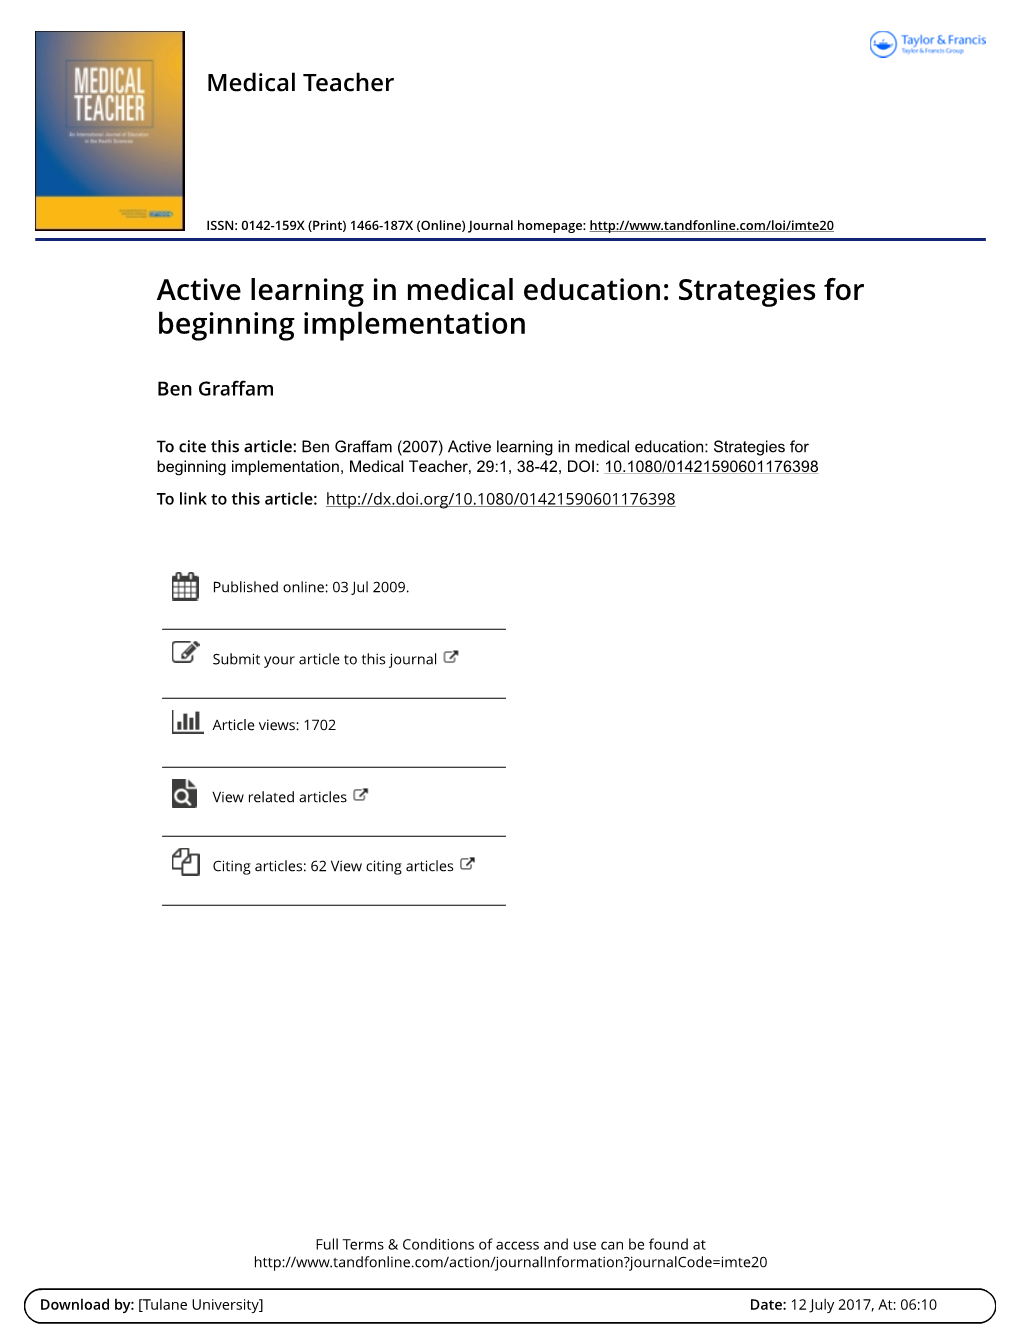 Active Learning in Medical Education: Strategies for Beginning Implementation